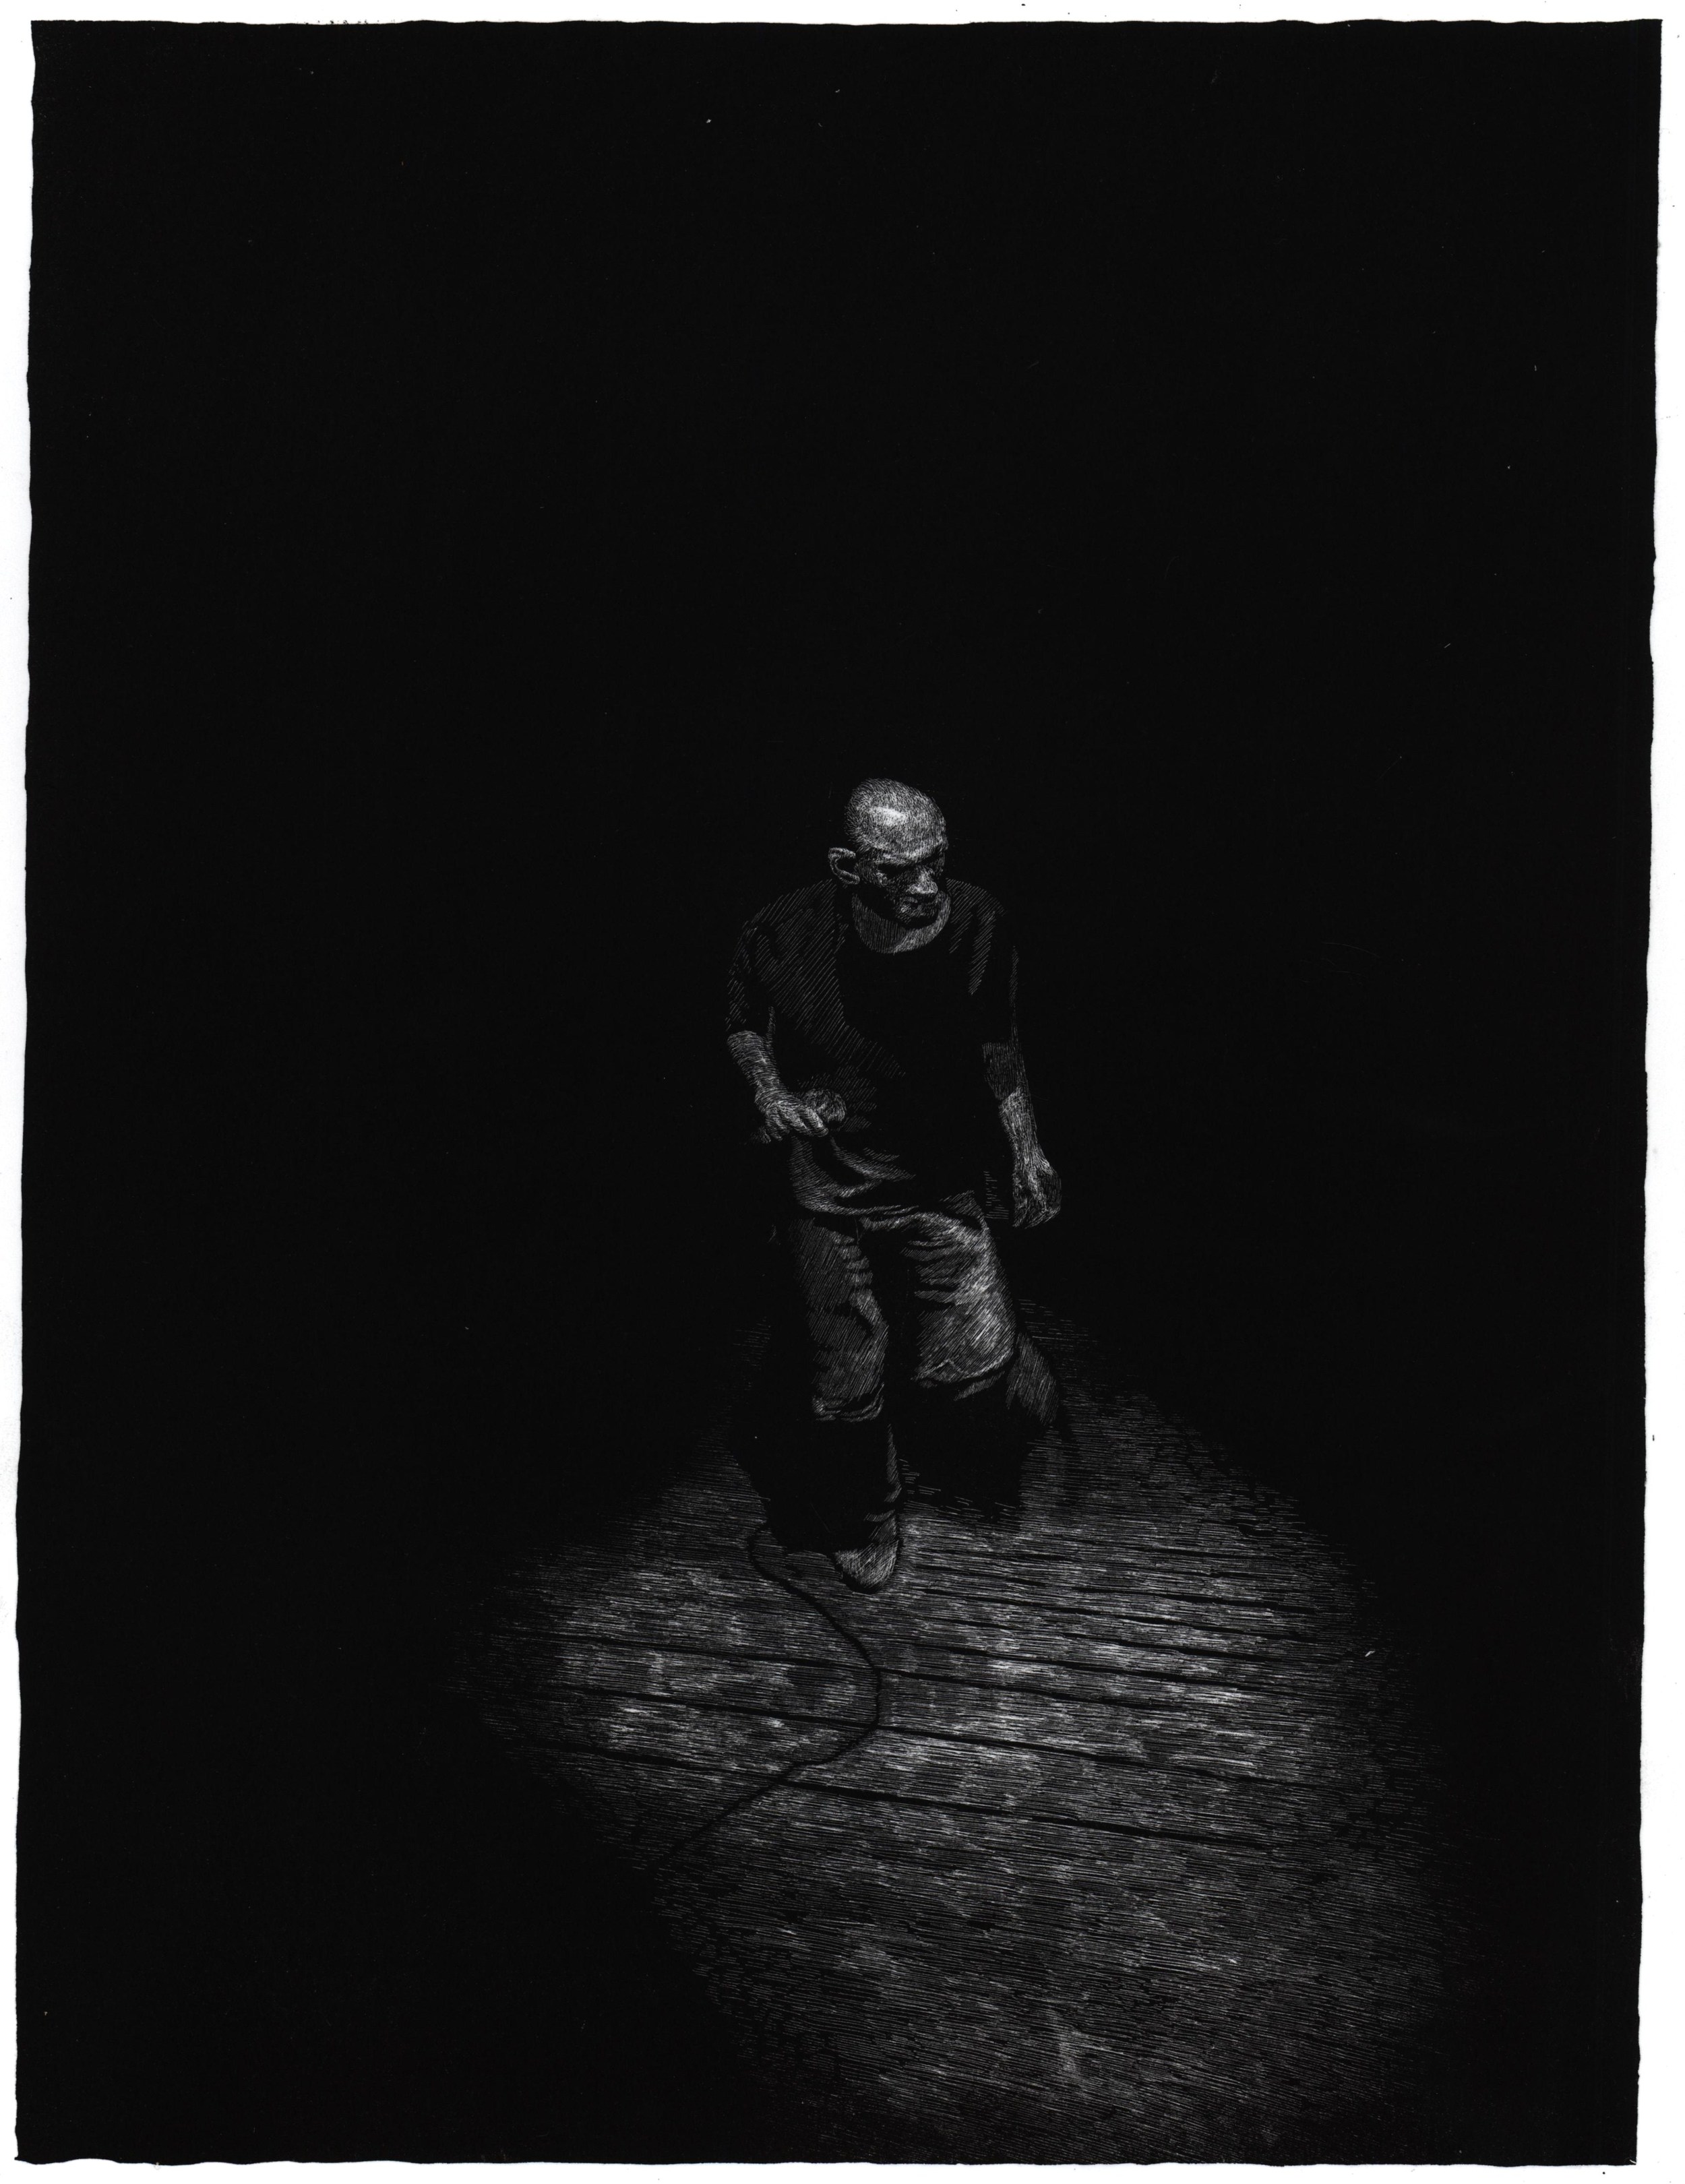 Hoax lithography (2012)